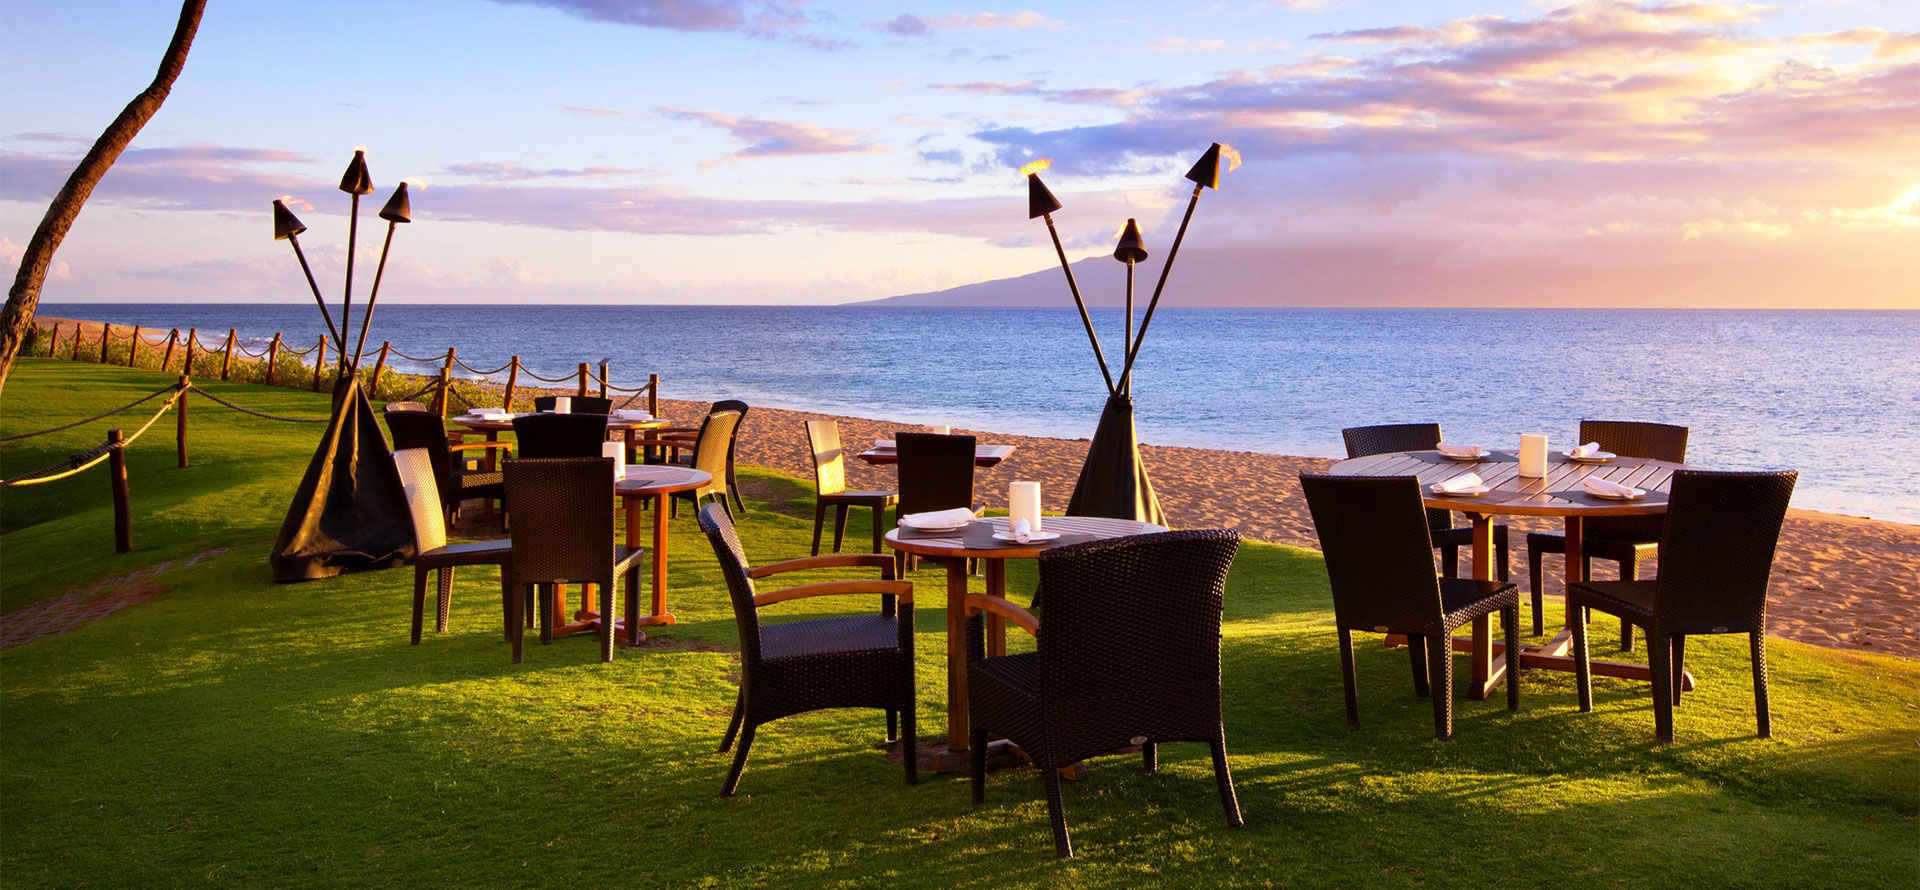 Maui all-inclusive adults only resort oceanside bbq.